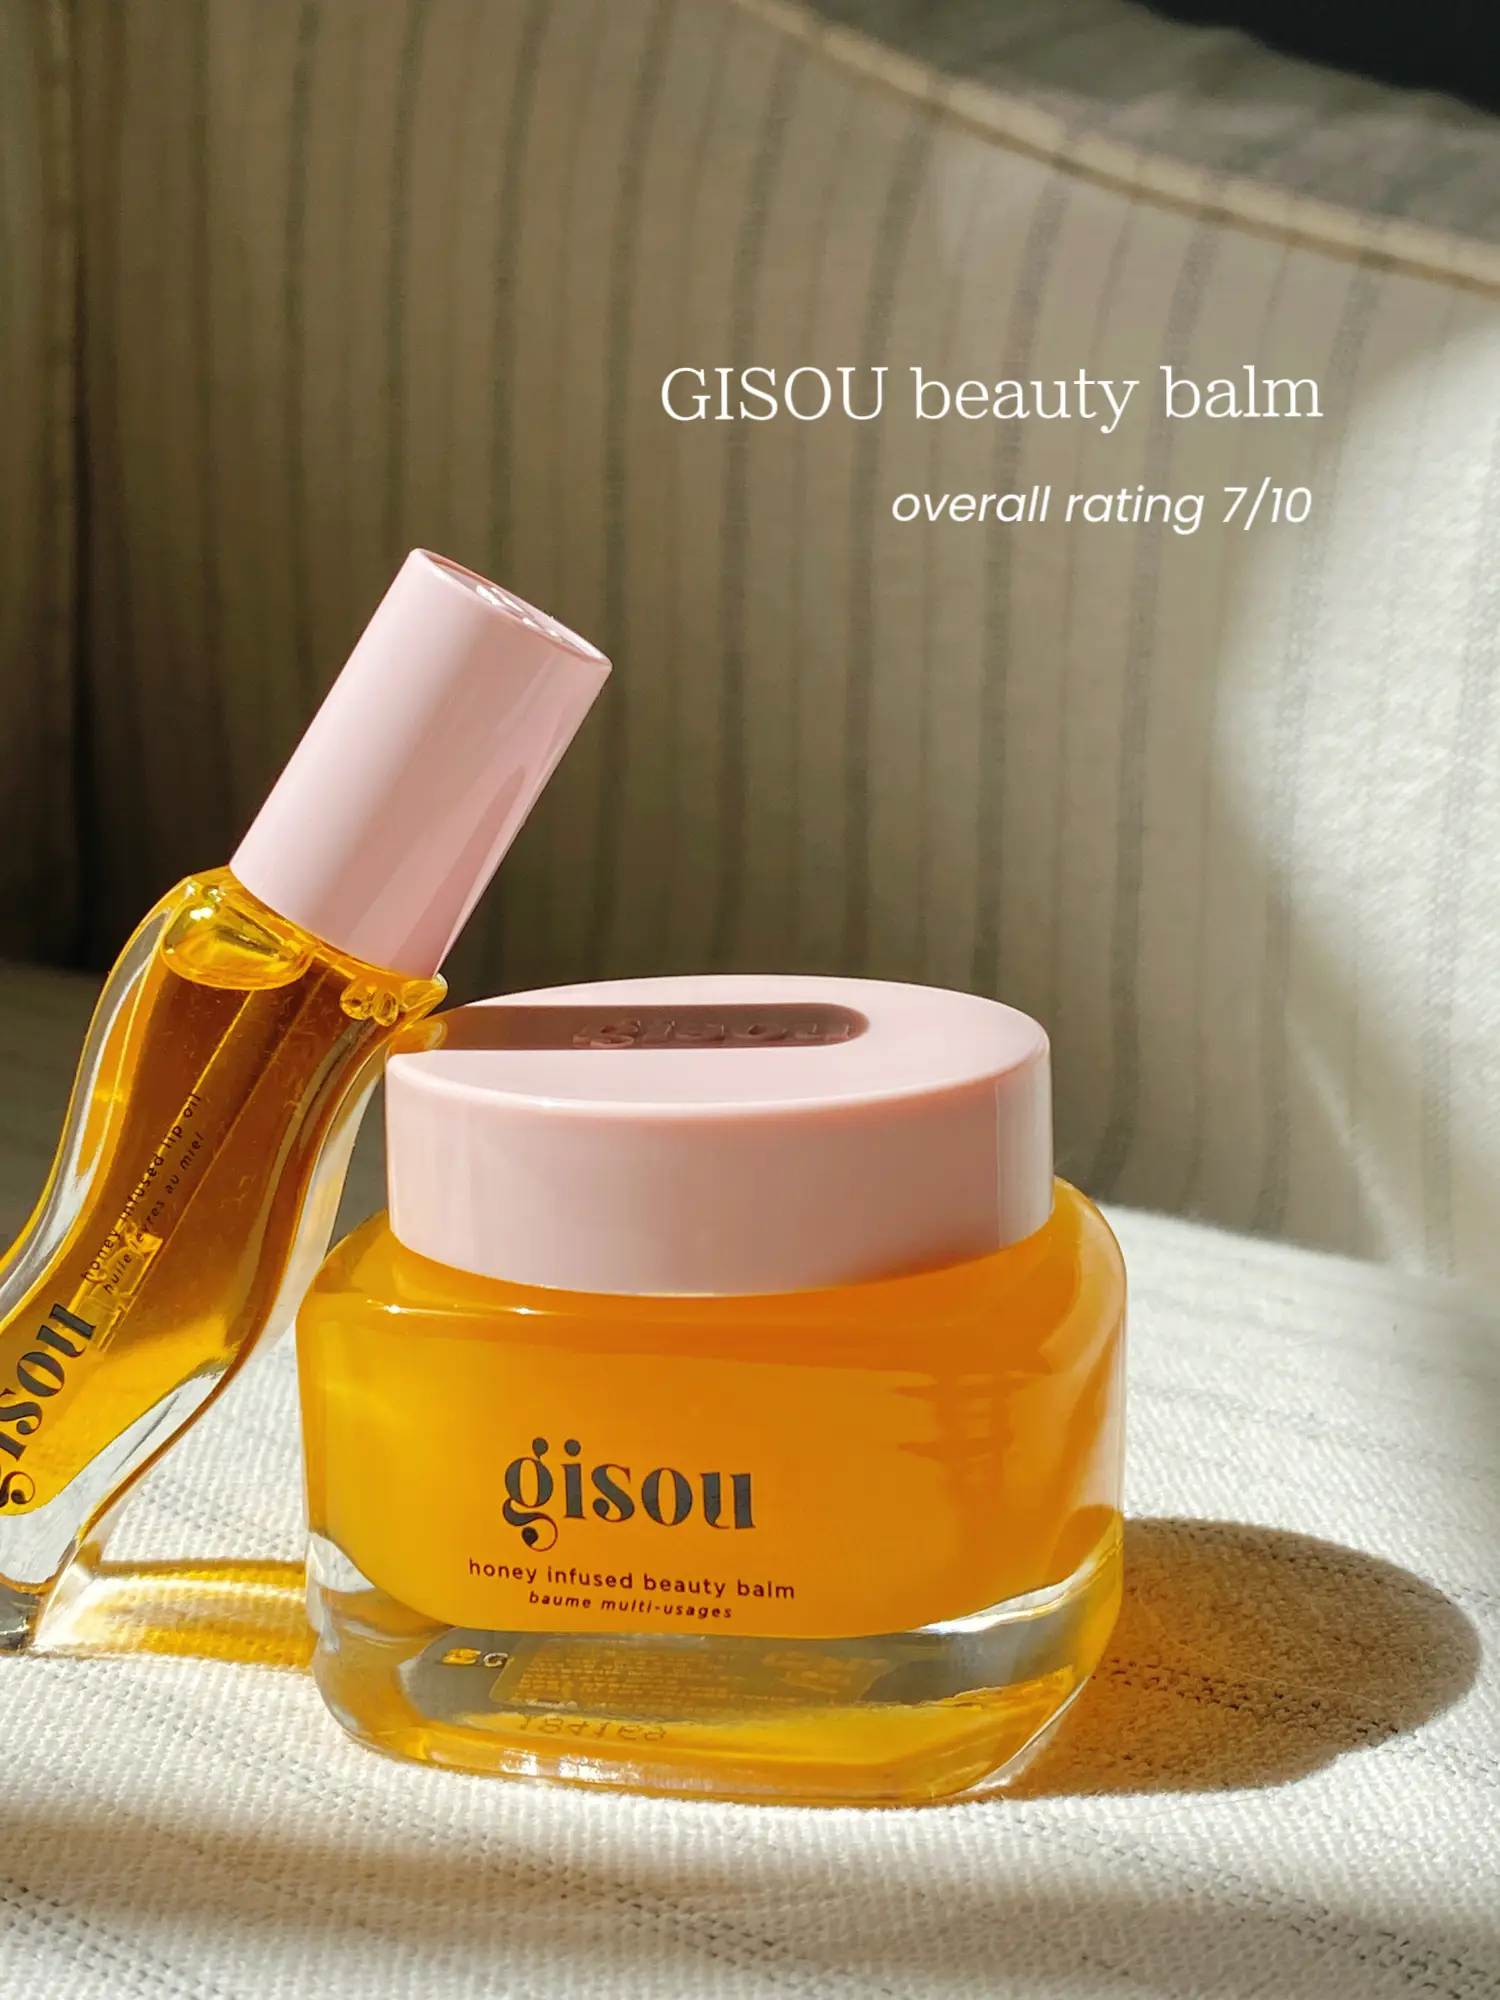 My review on Gisou products 🍯, Gallery posted by Mere